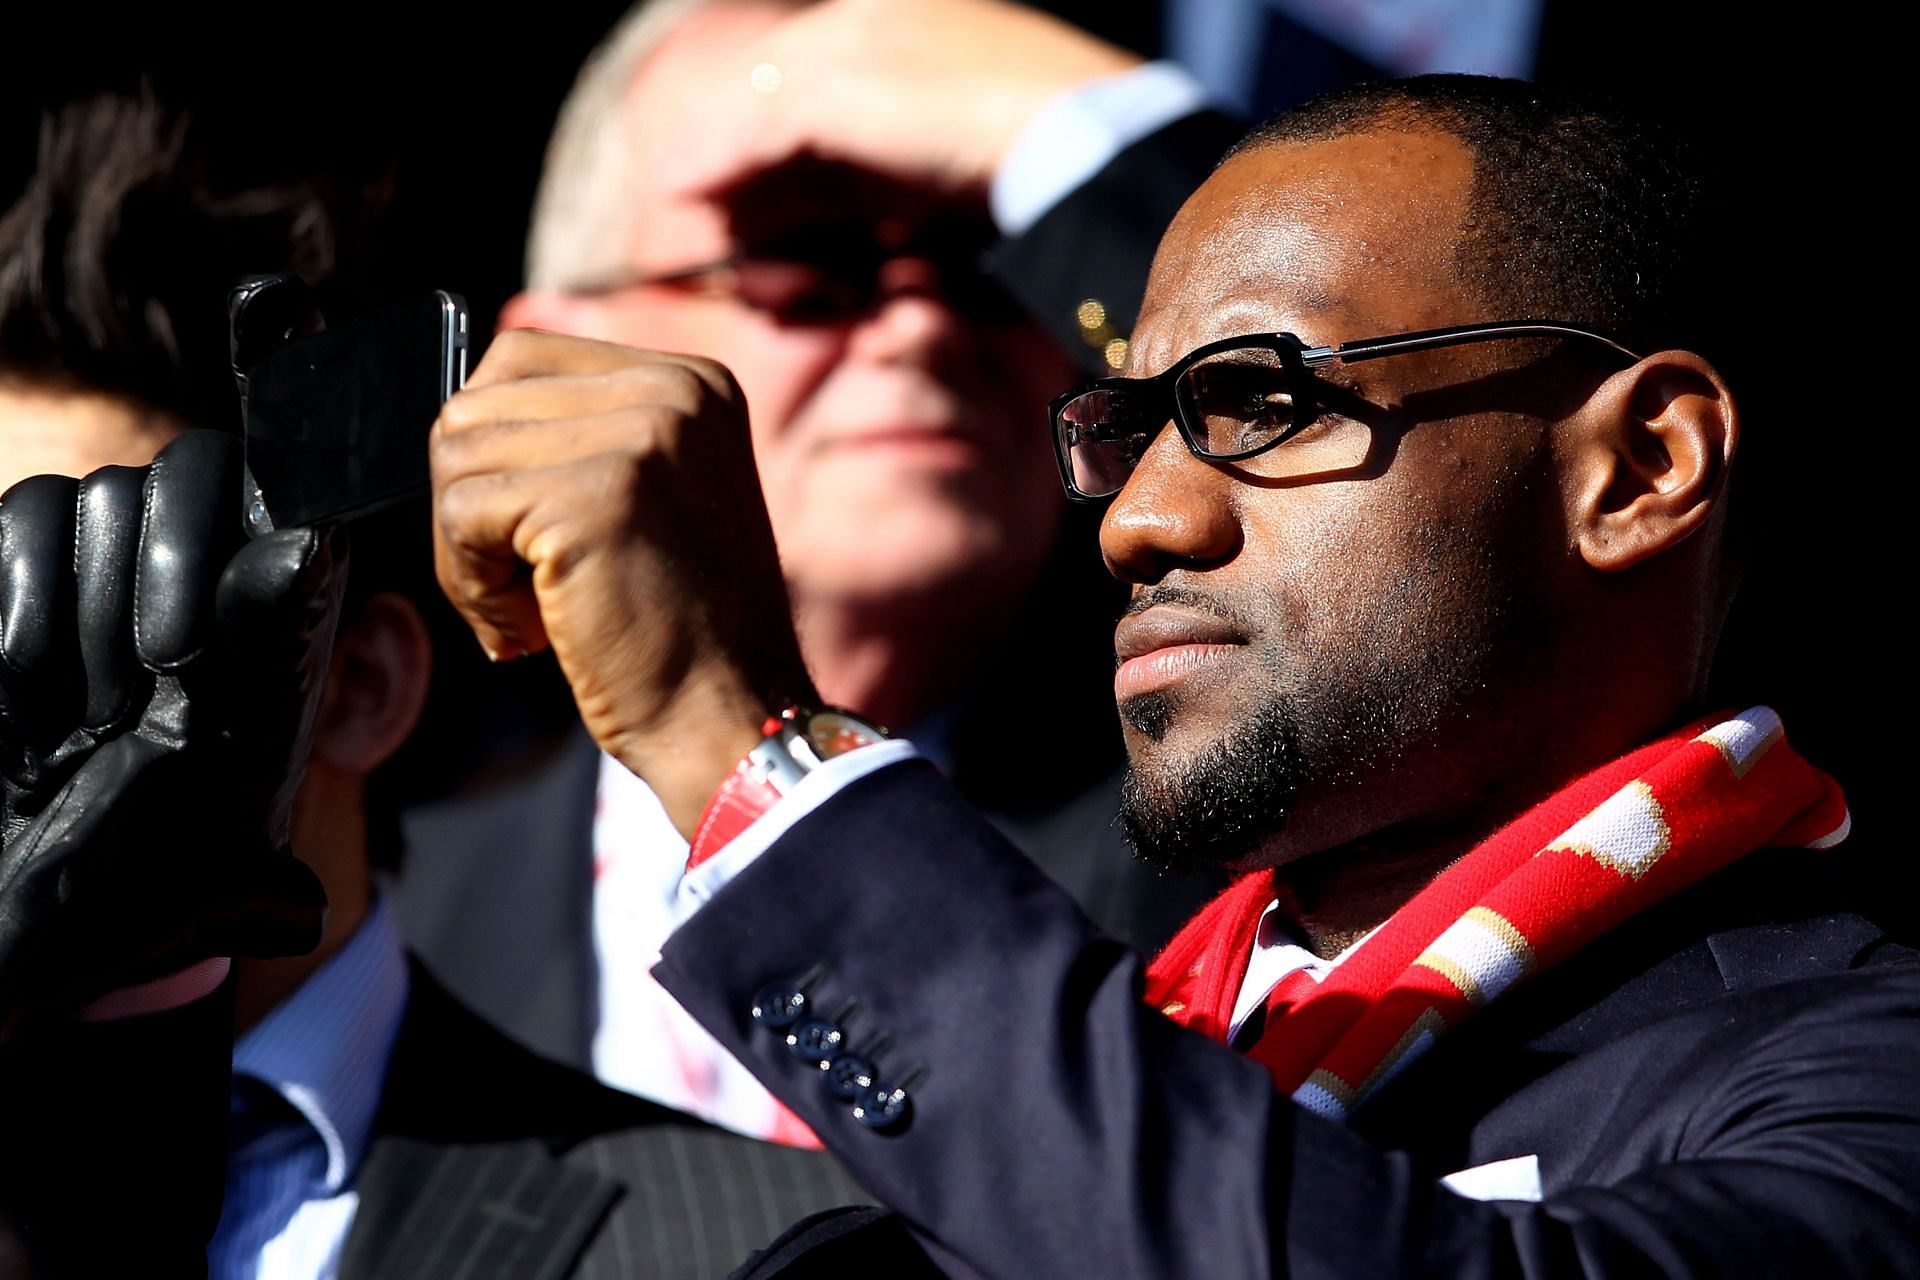 Liverpool owner LeBron James could still win a trophy this year.